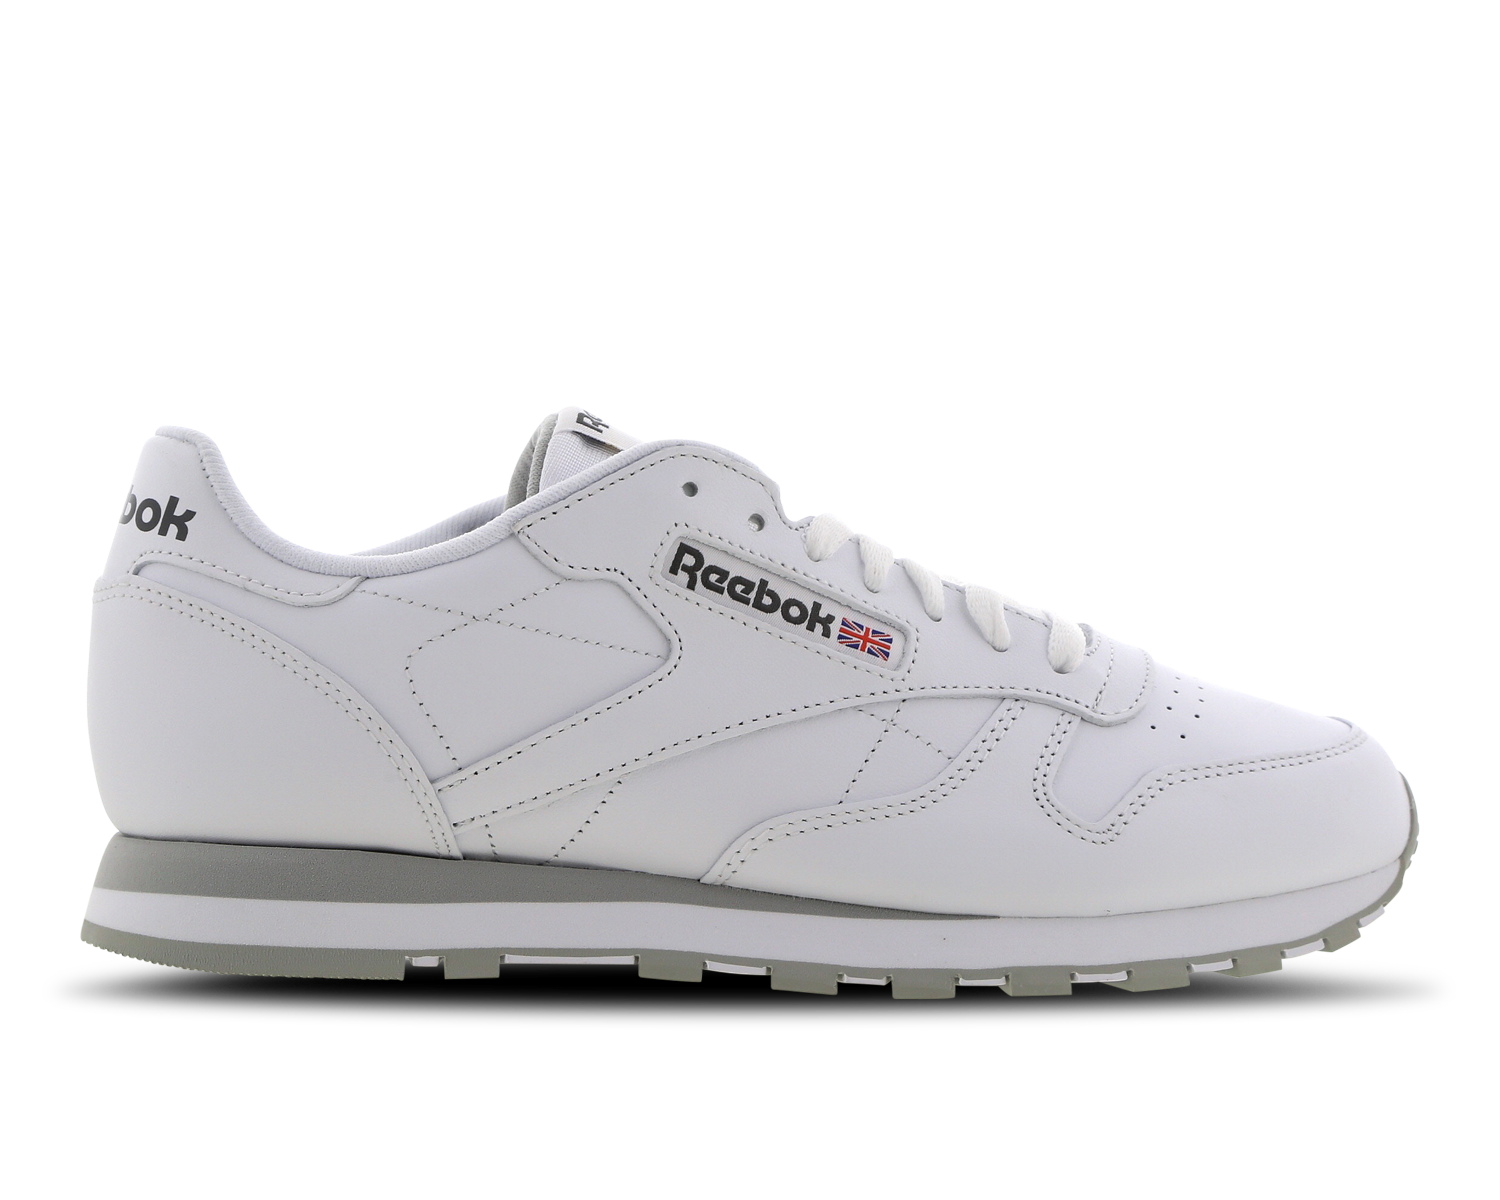 reebok leather shoes